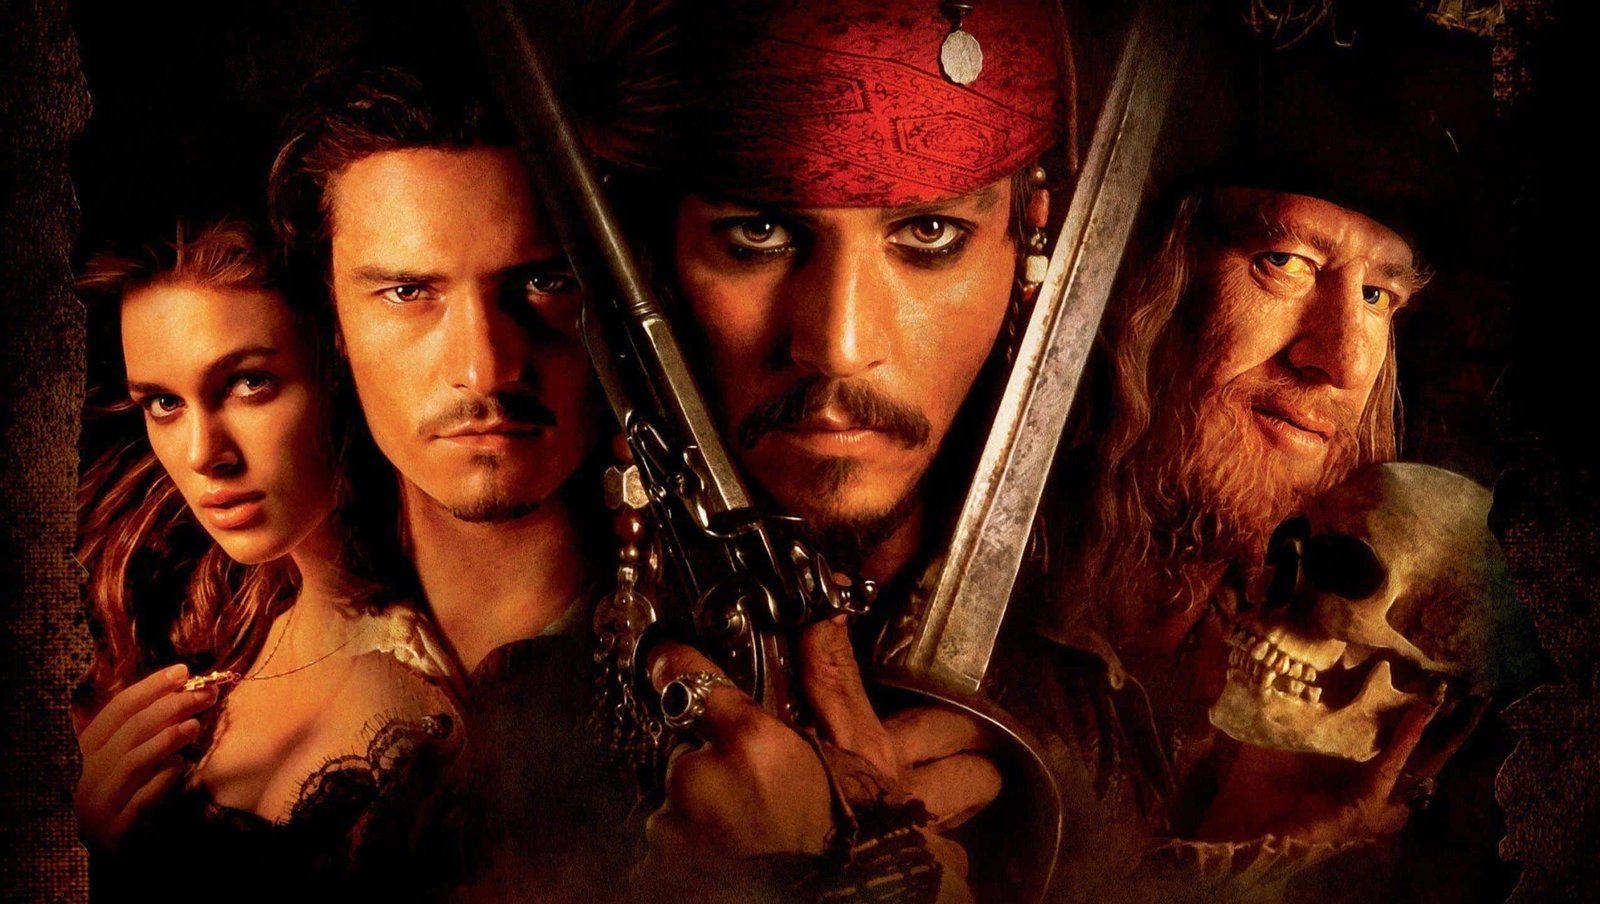 Best Johnny Depp Movies Ranked - Pirates of the Caribbean